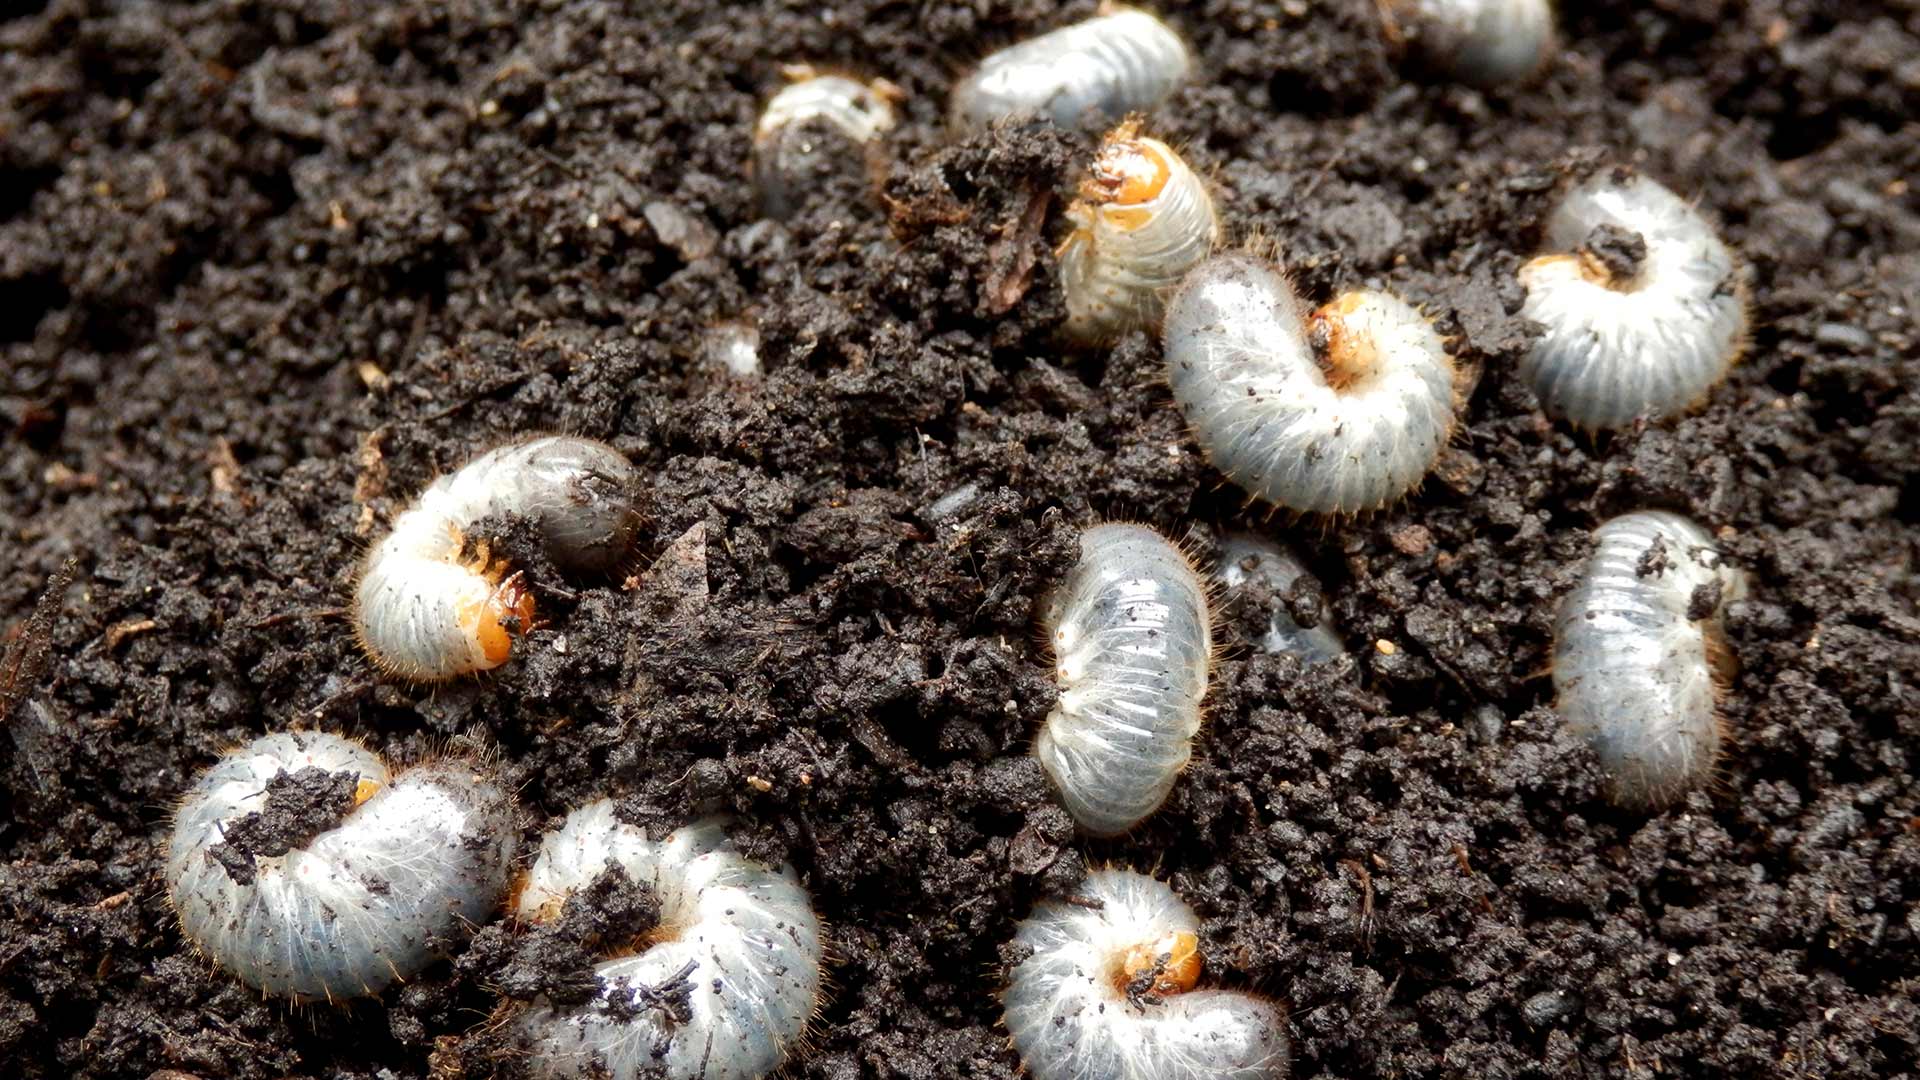 Here Are Some Tell-Tale Signs That Grubs Are Munching on Your Lawn